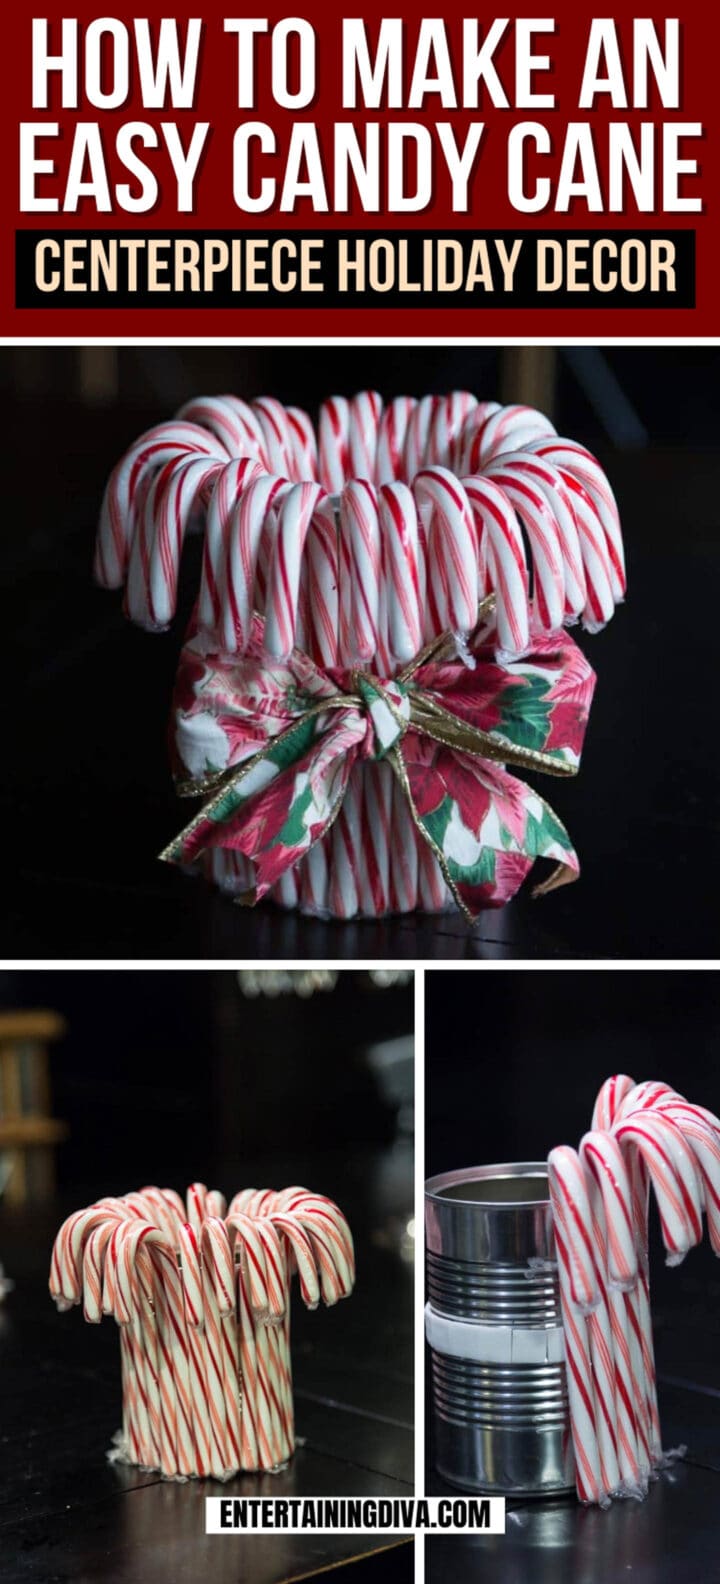 How to Make An Easy Candy Cane Christmas Centerpiece